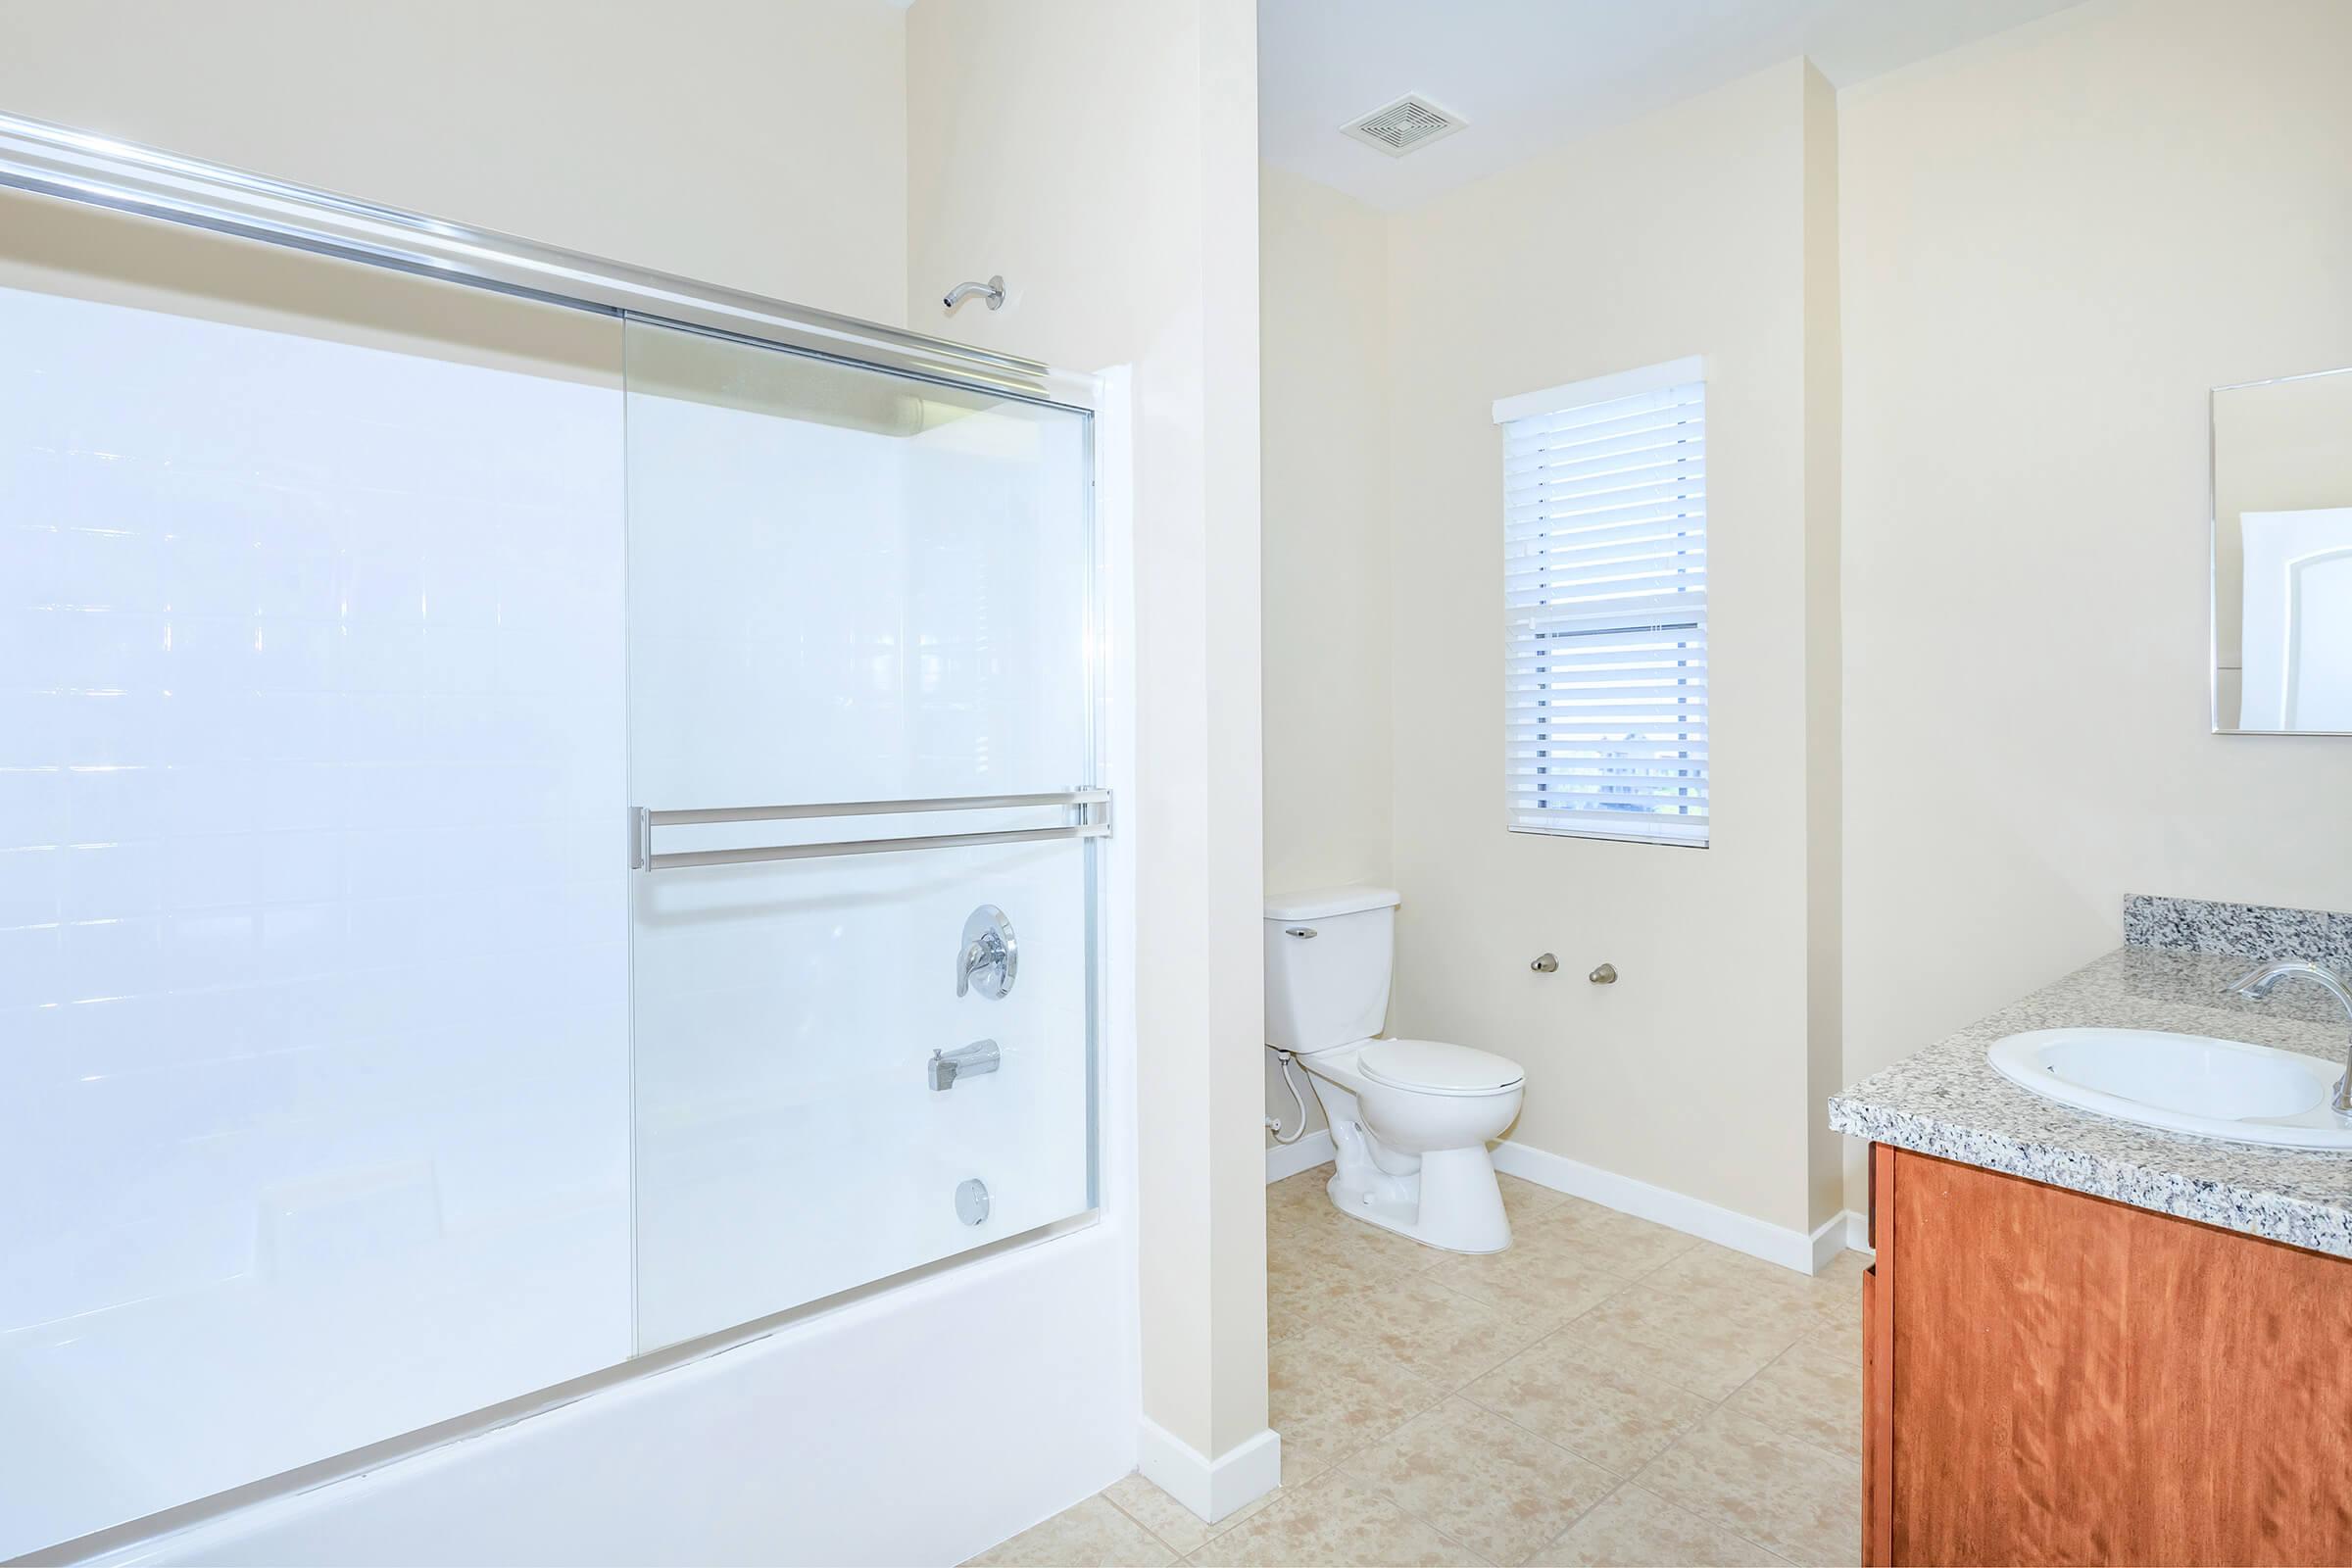 Unfurnished bathroom with wooden cabinets